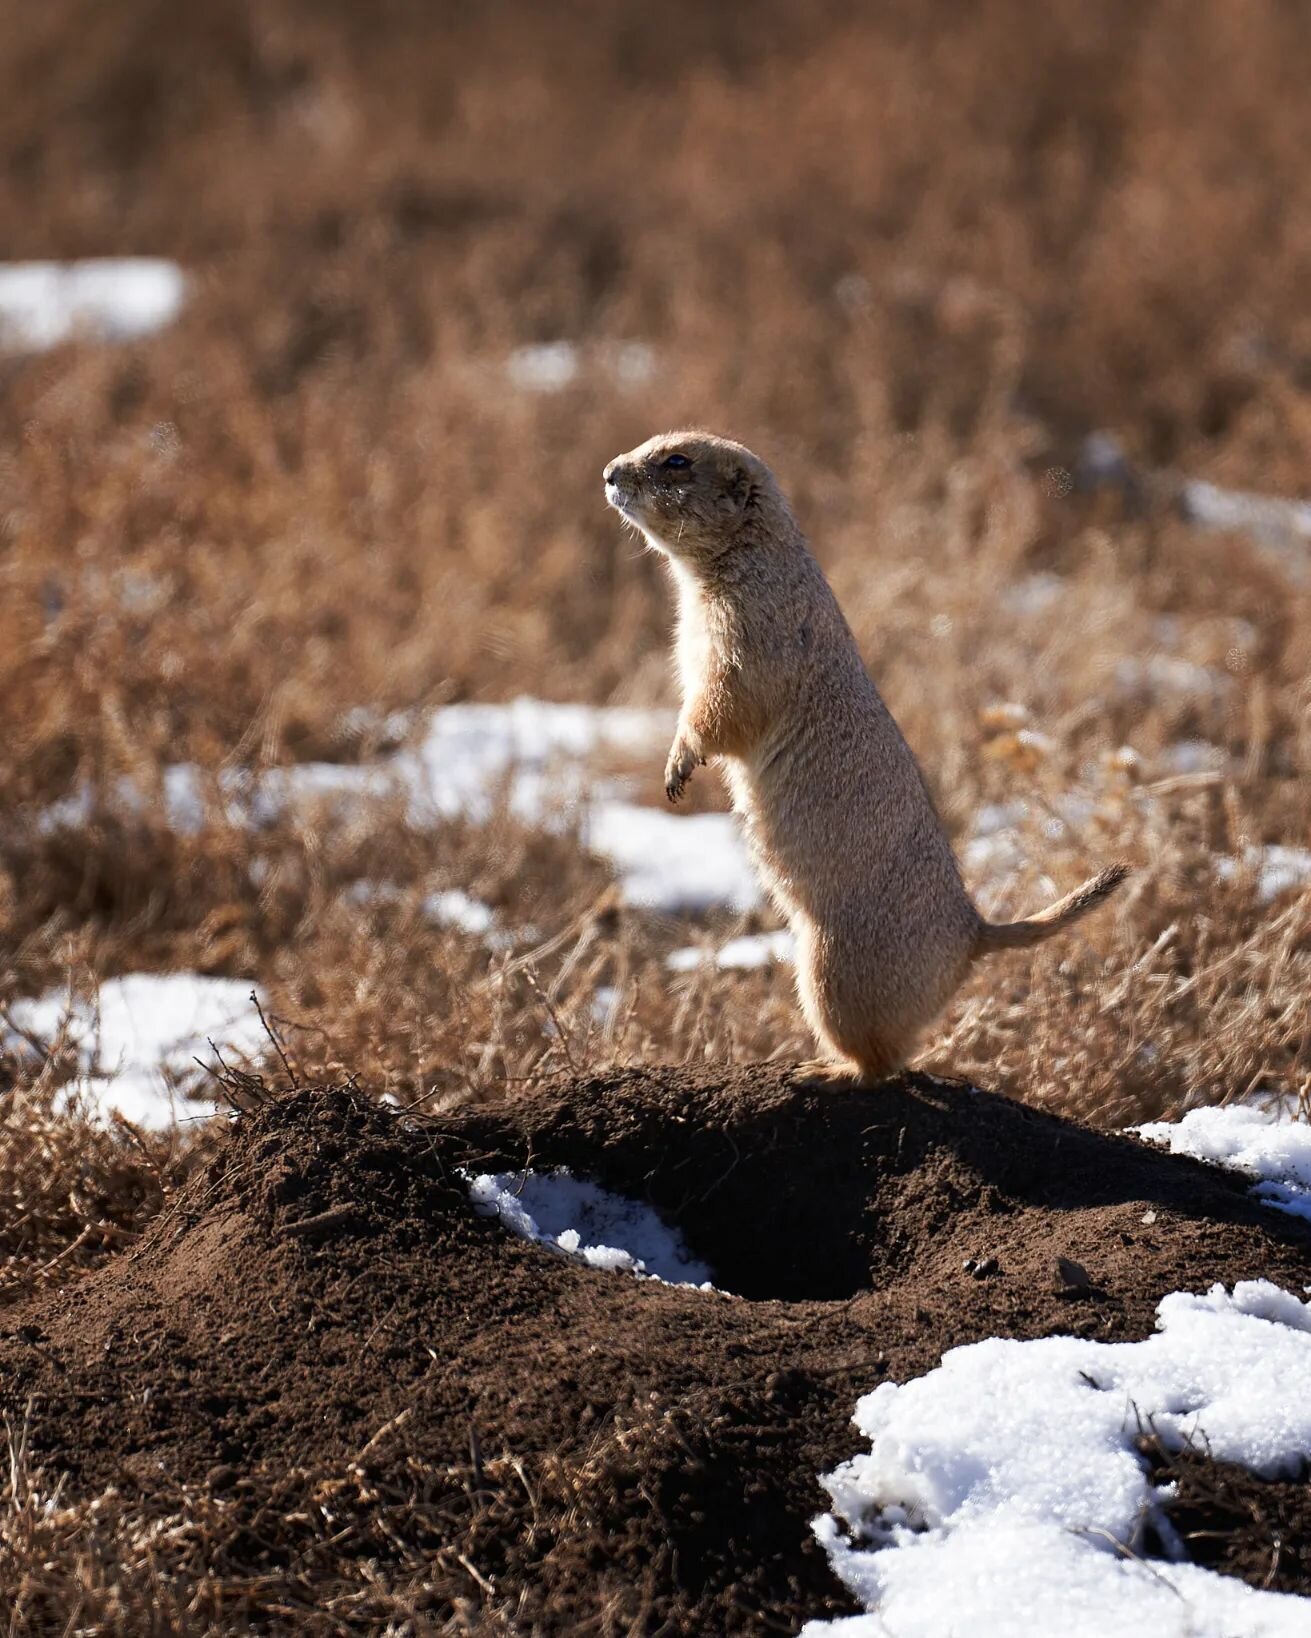 This little prairie dog is looking to the weekend. Cheers, friends.

#wildlifephotography #explorecolorado #wildlifephotographer #natgeoyourshot #prairiedog #alphacollective